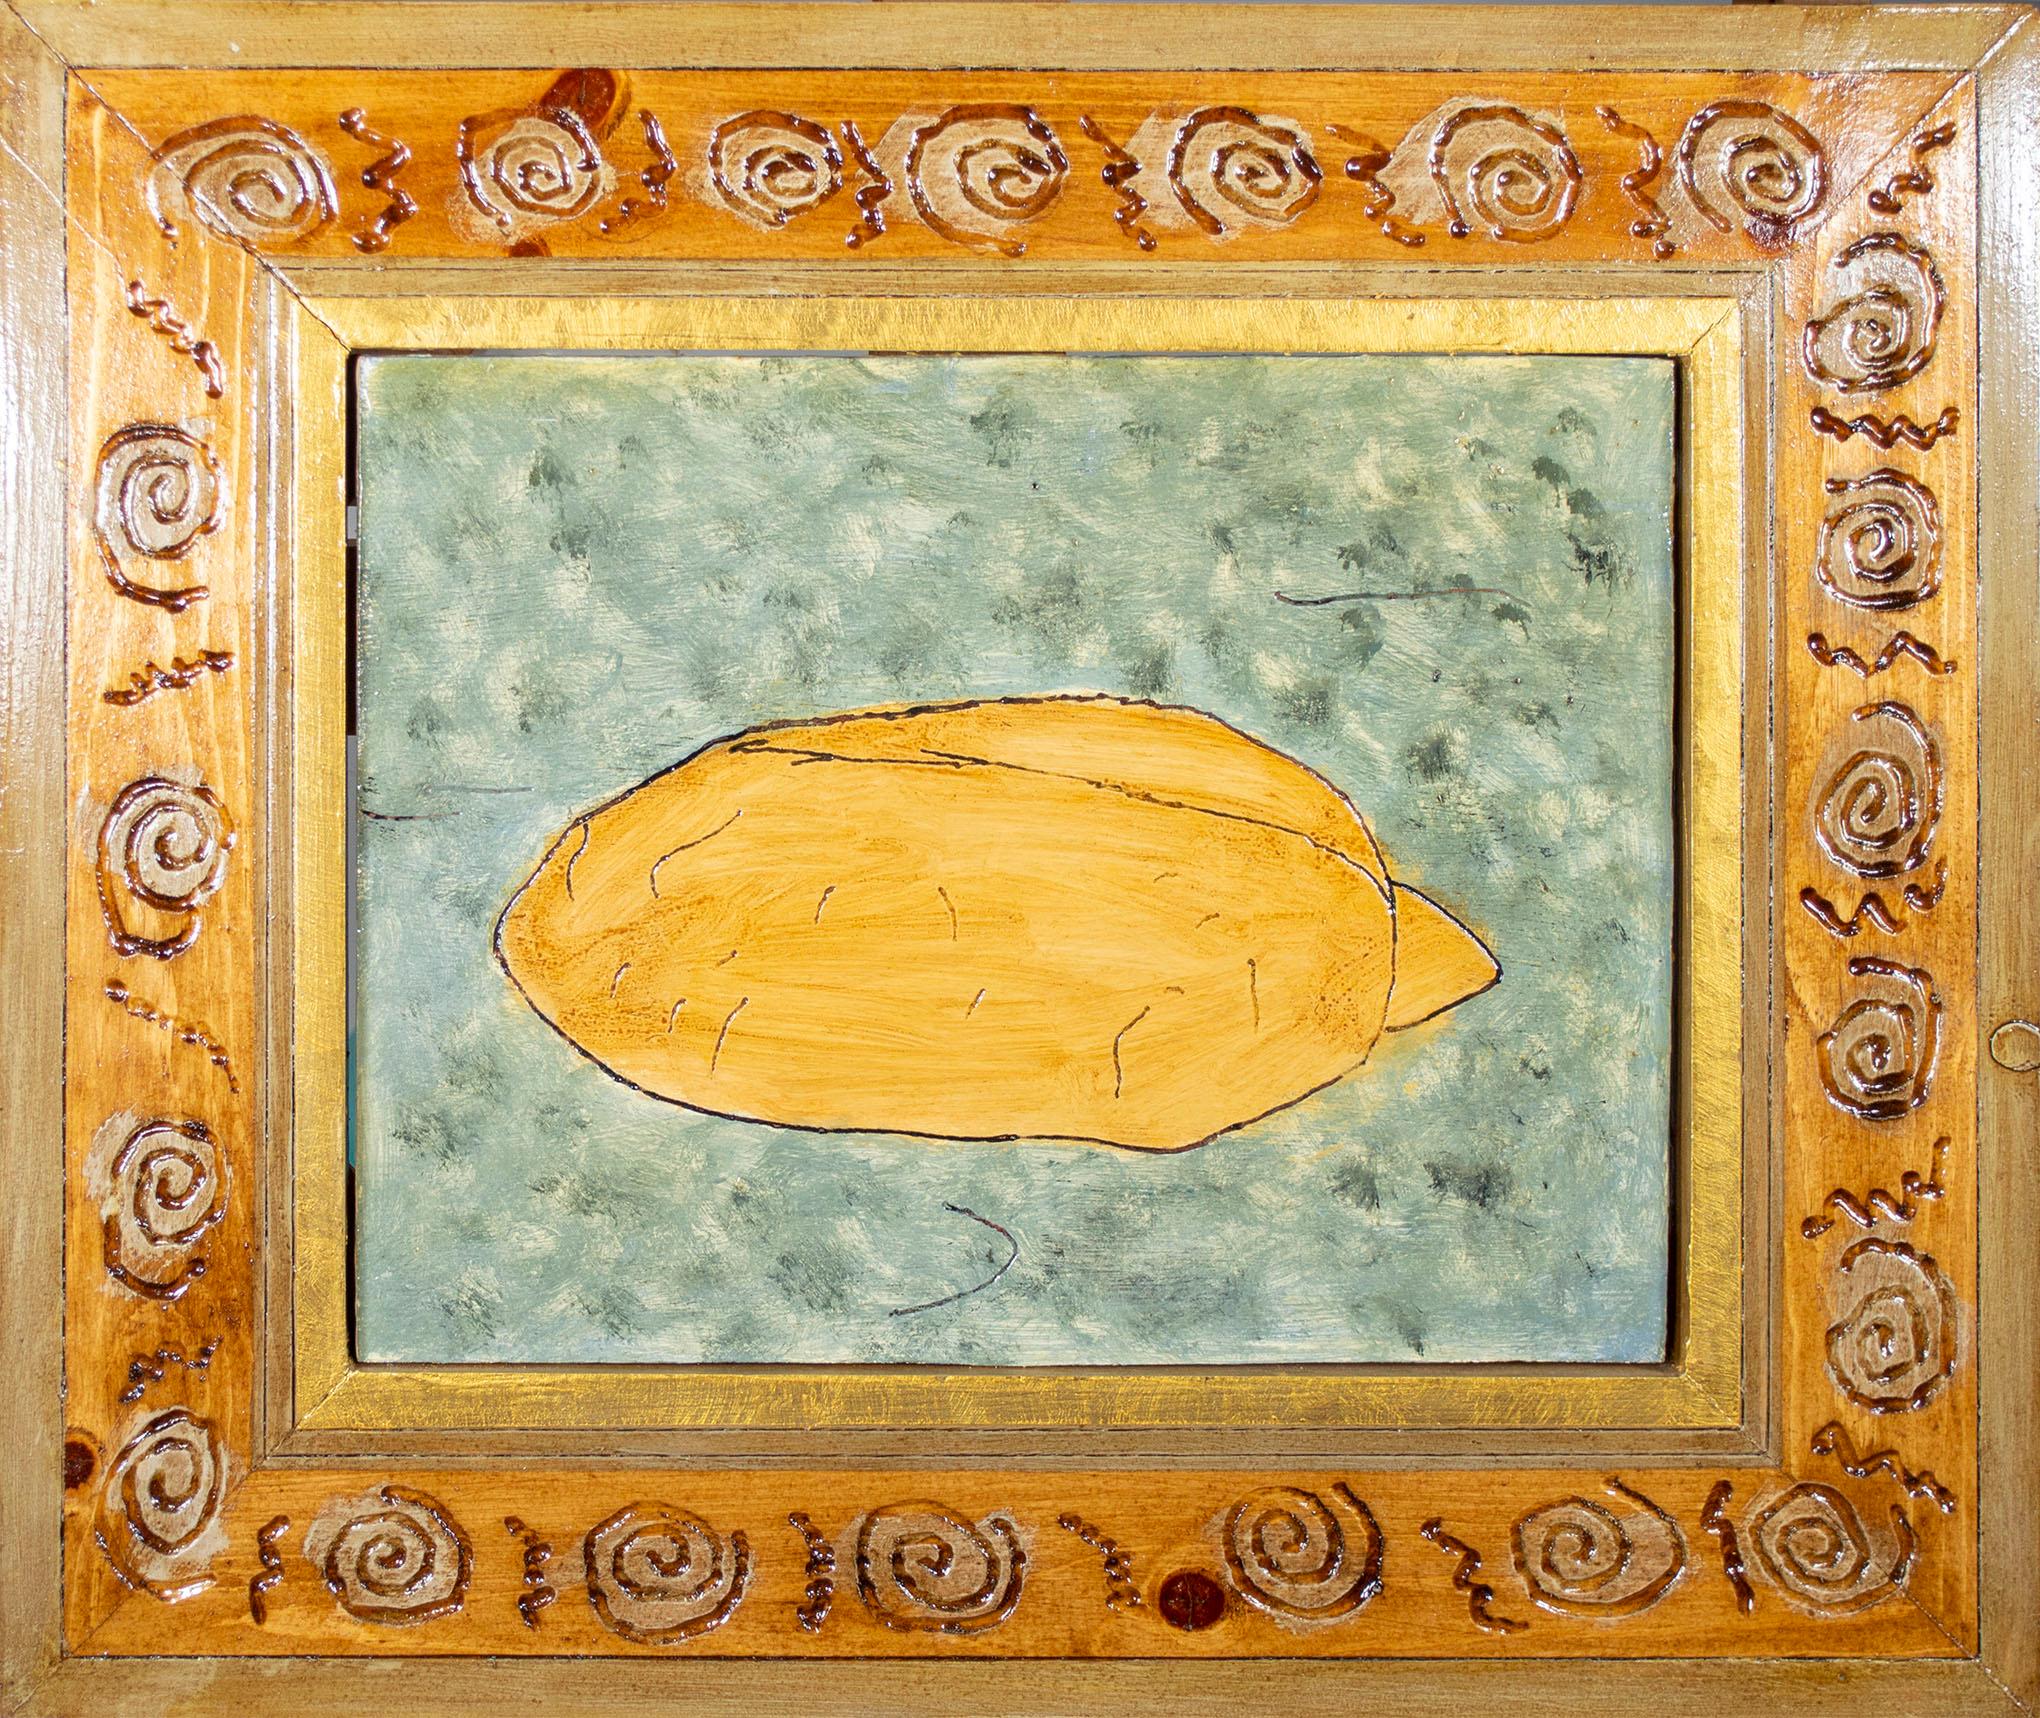 'Bread on Carpet' original oil on wood painting signed by Robert Richter